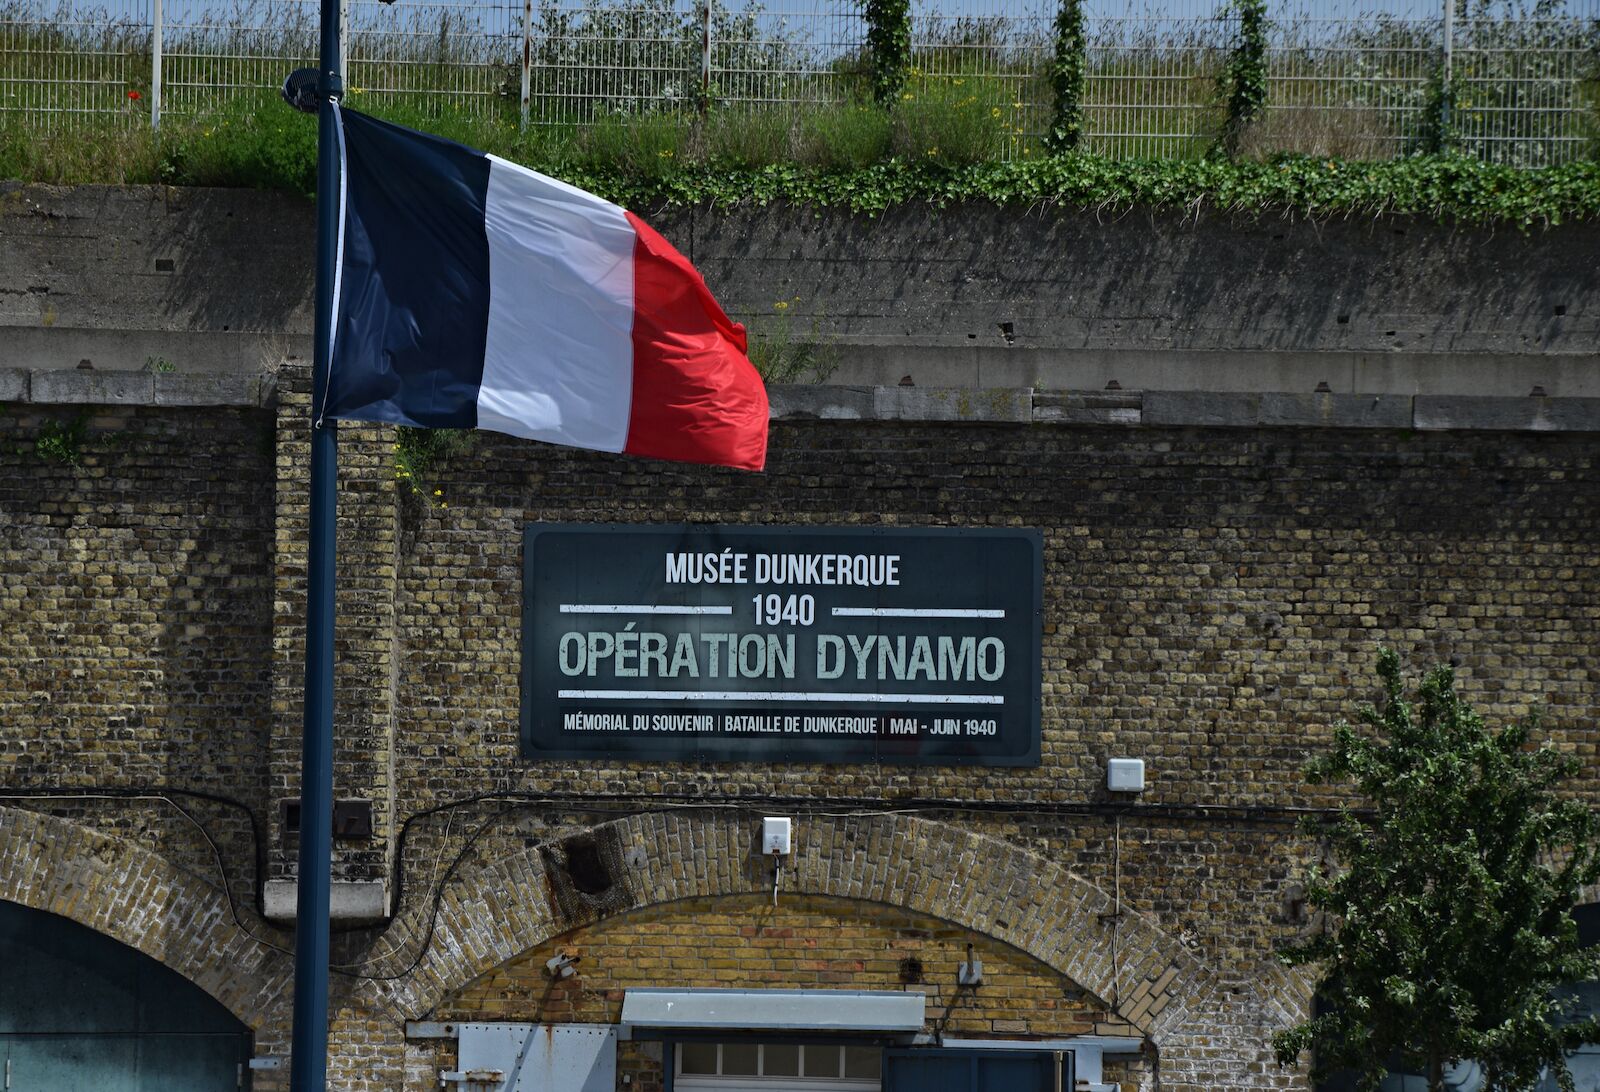 The facade of the Musée Dunkerque 1940 - Operation Dynamo in Dunkirk, France